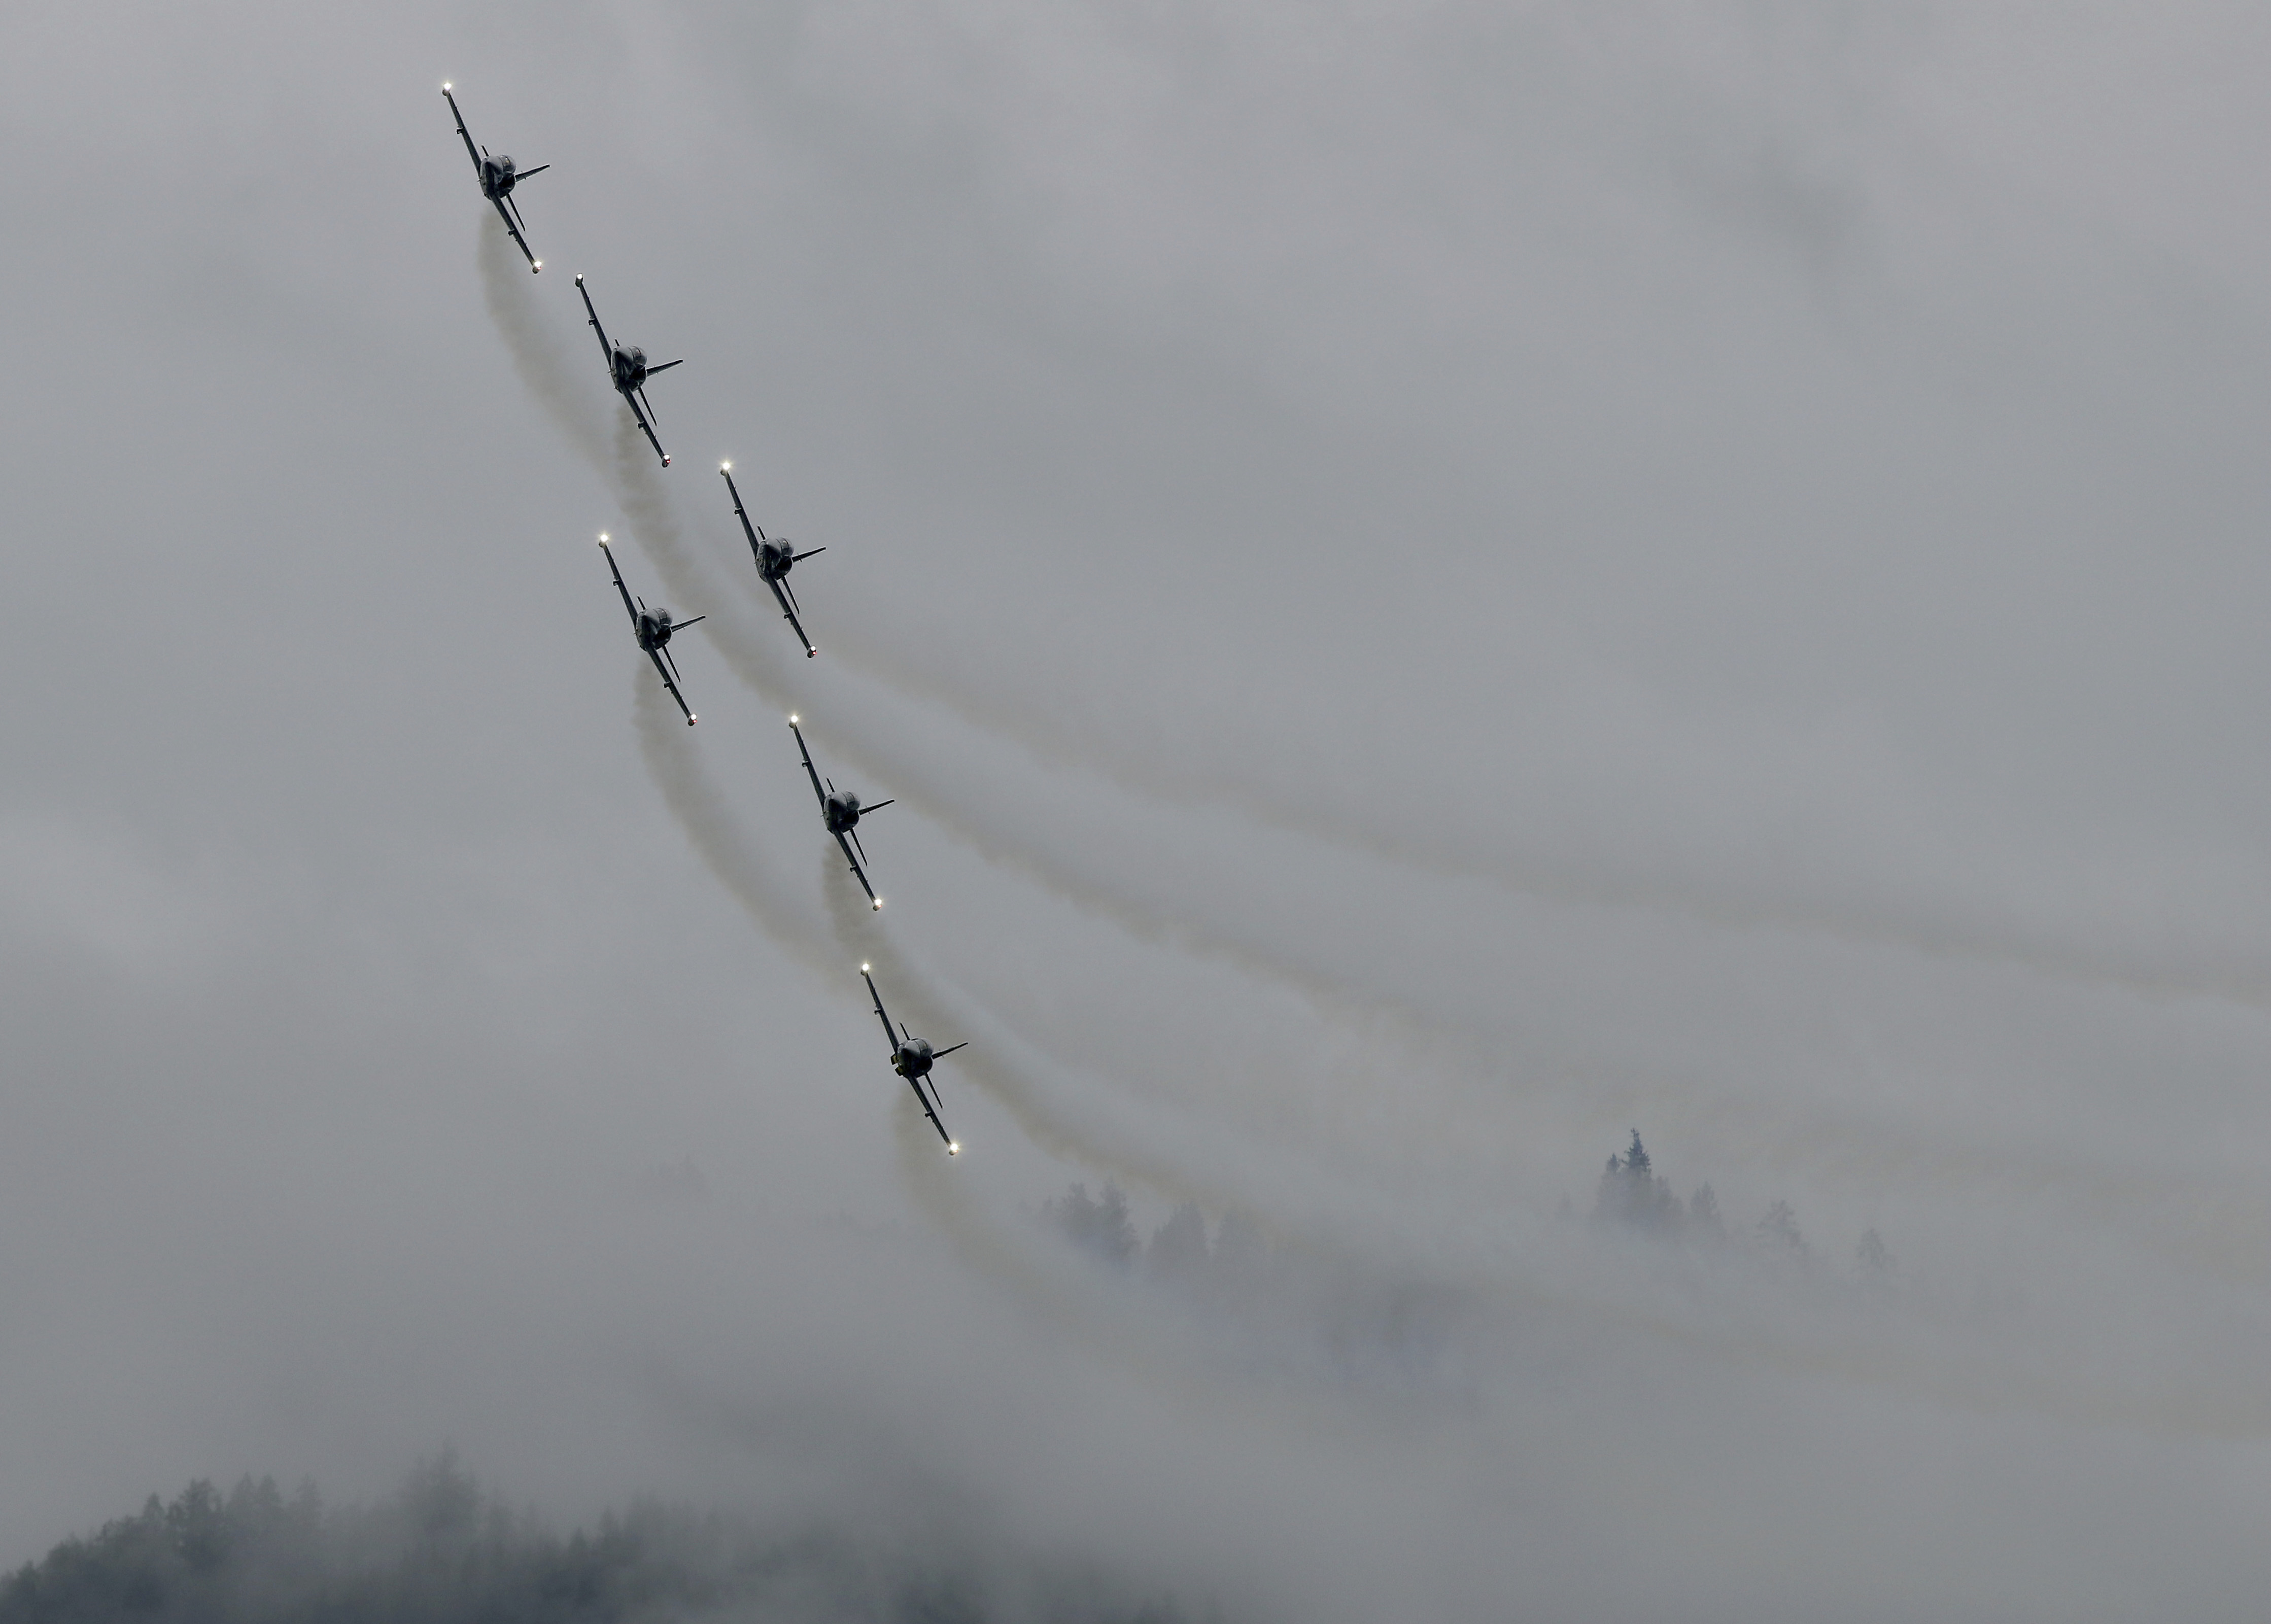 The Breitling Jet perform their show during the Airpower 19 airplane show in Zeltweg, Styria, Austria, Friday, Sept. 6, 2019. (AP Photo/Ronald Zak)